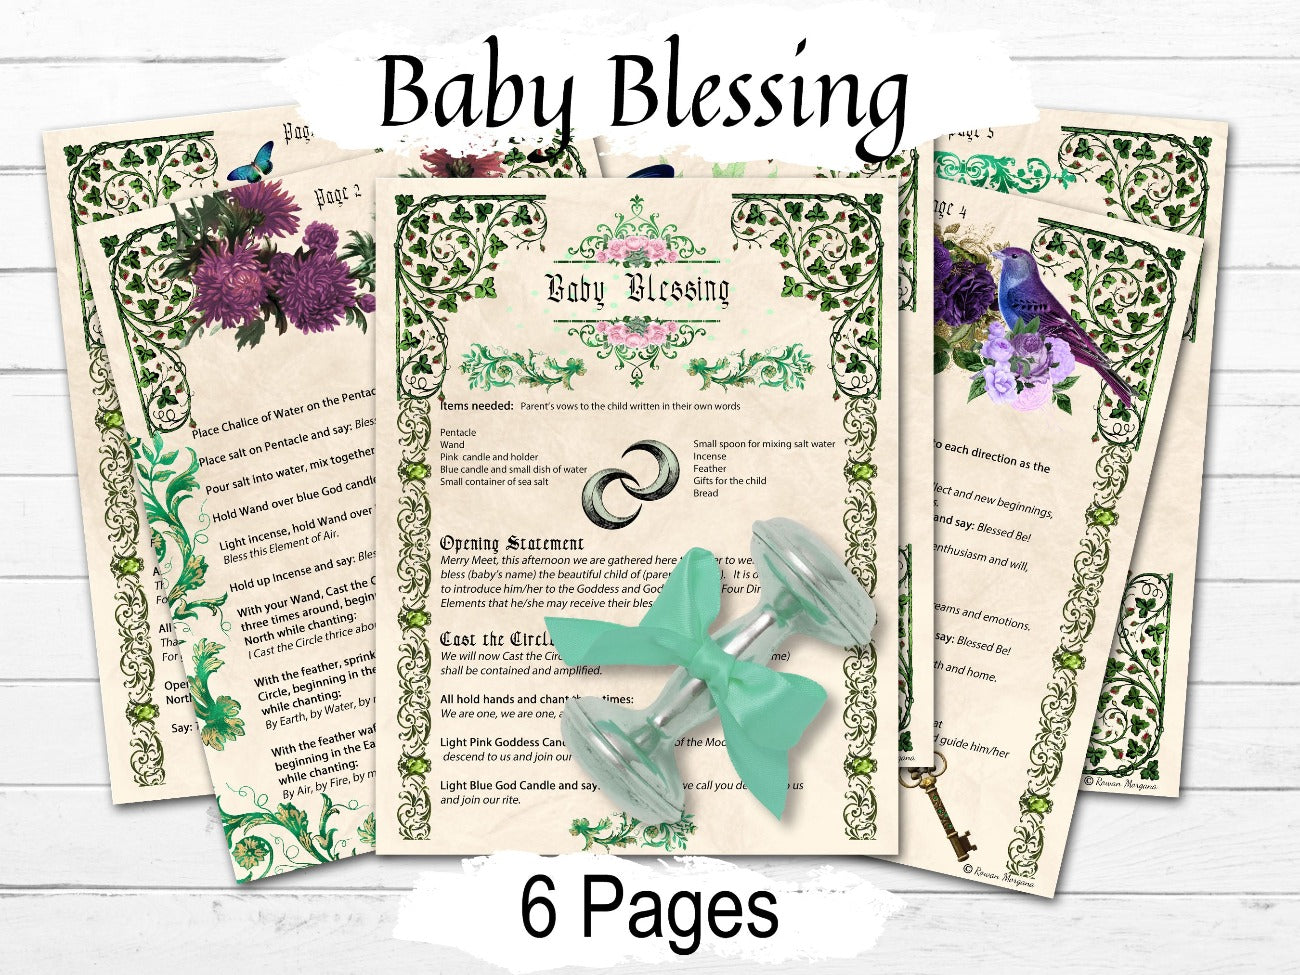 BABY BLESSING 6 Pages, Wiccaning Naming Ritual, Complete Witchcraft Baby Ritual, Pagan Baby Spell, Witch Baby Spell, Witch Child, Printable - Morgana Magick Spell